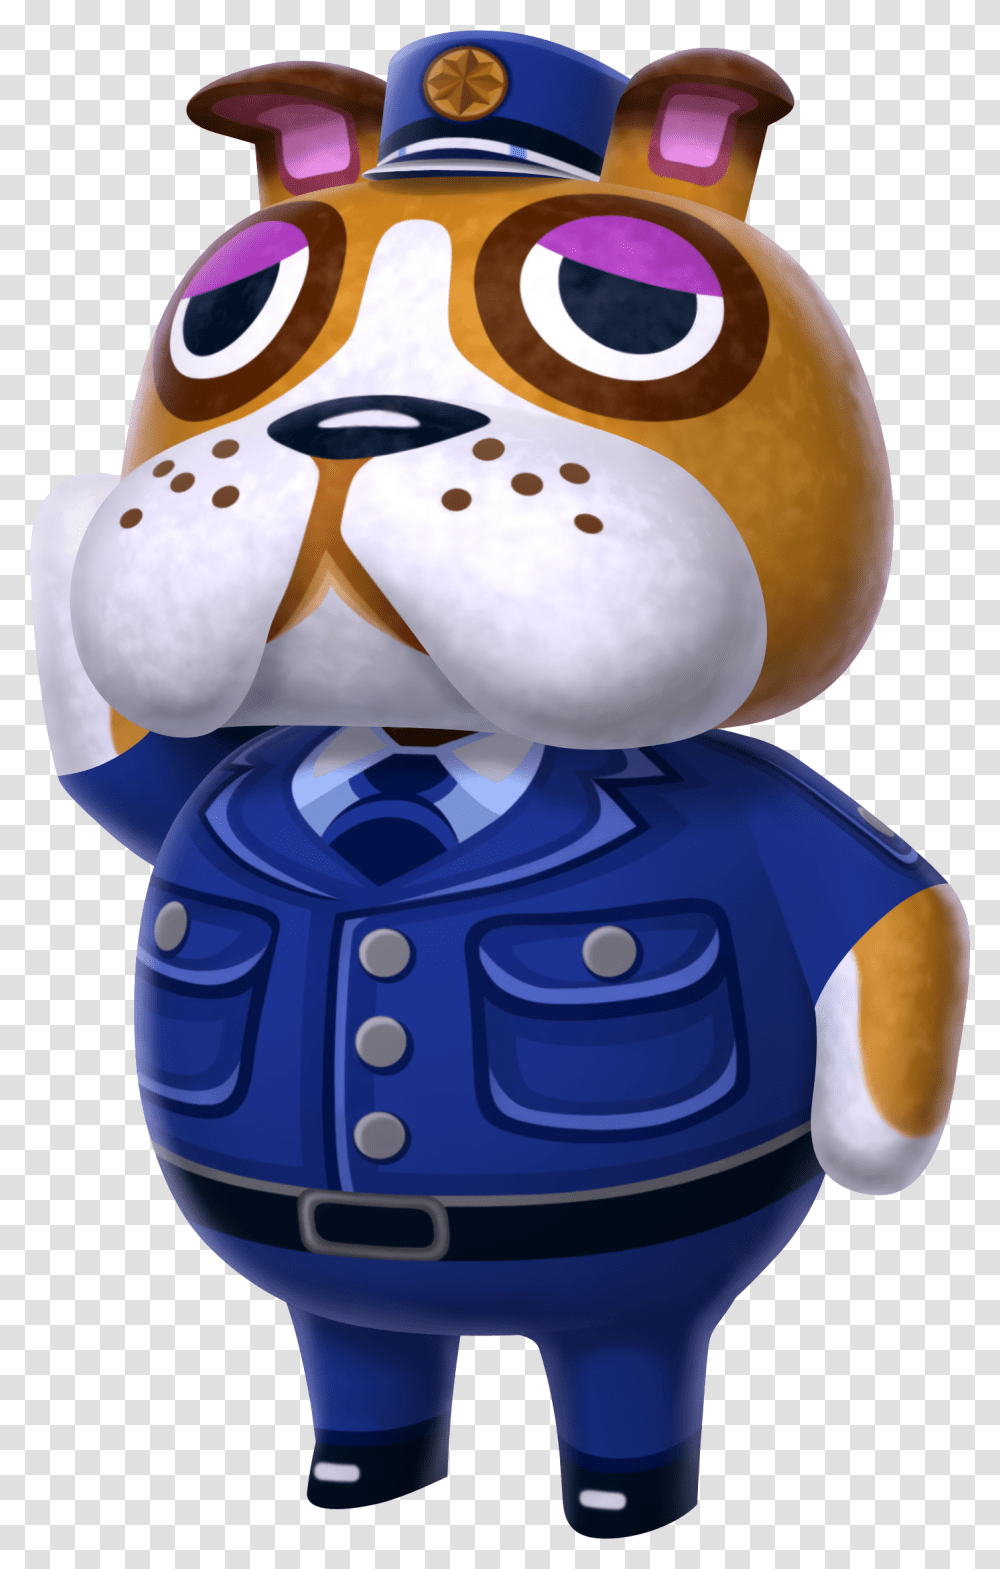 Animal Crossing Wiki Police Dogs Animal Crossing, Toy, Outdoors, Figurine Transparent Png